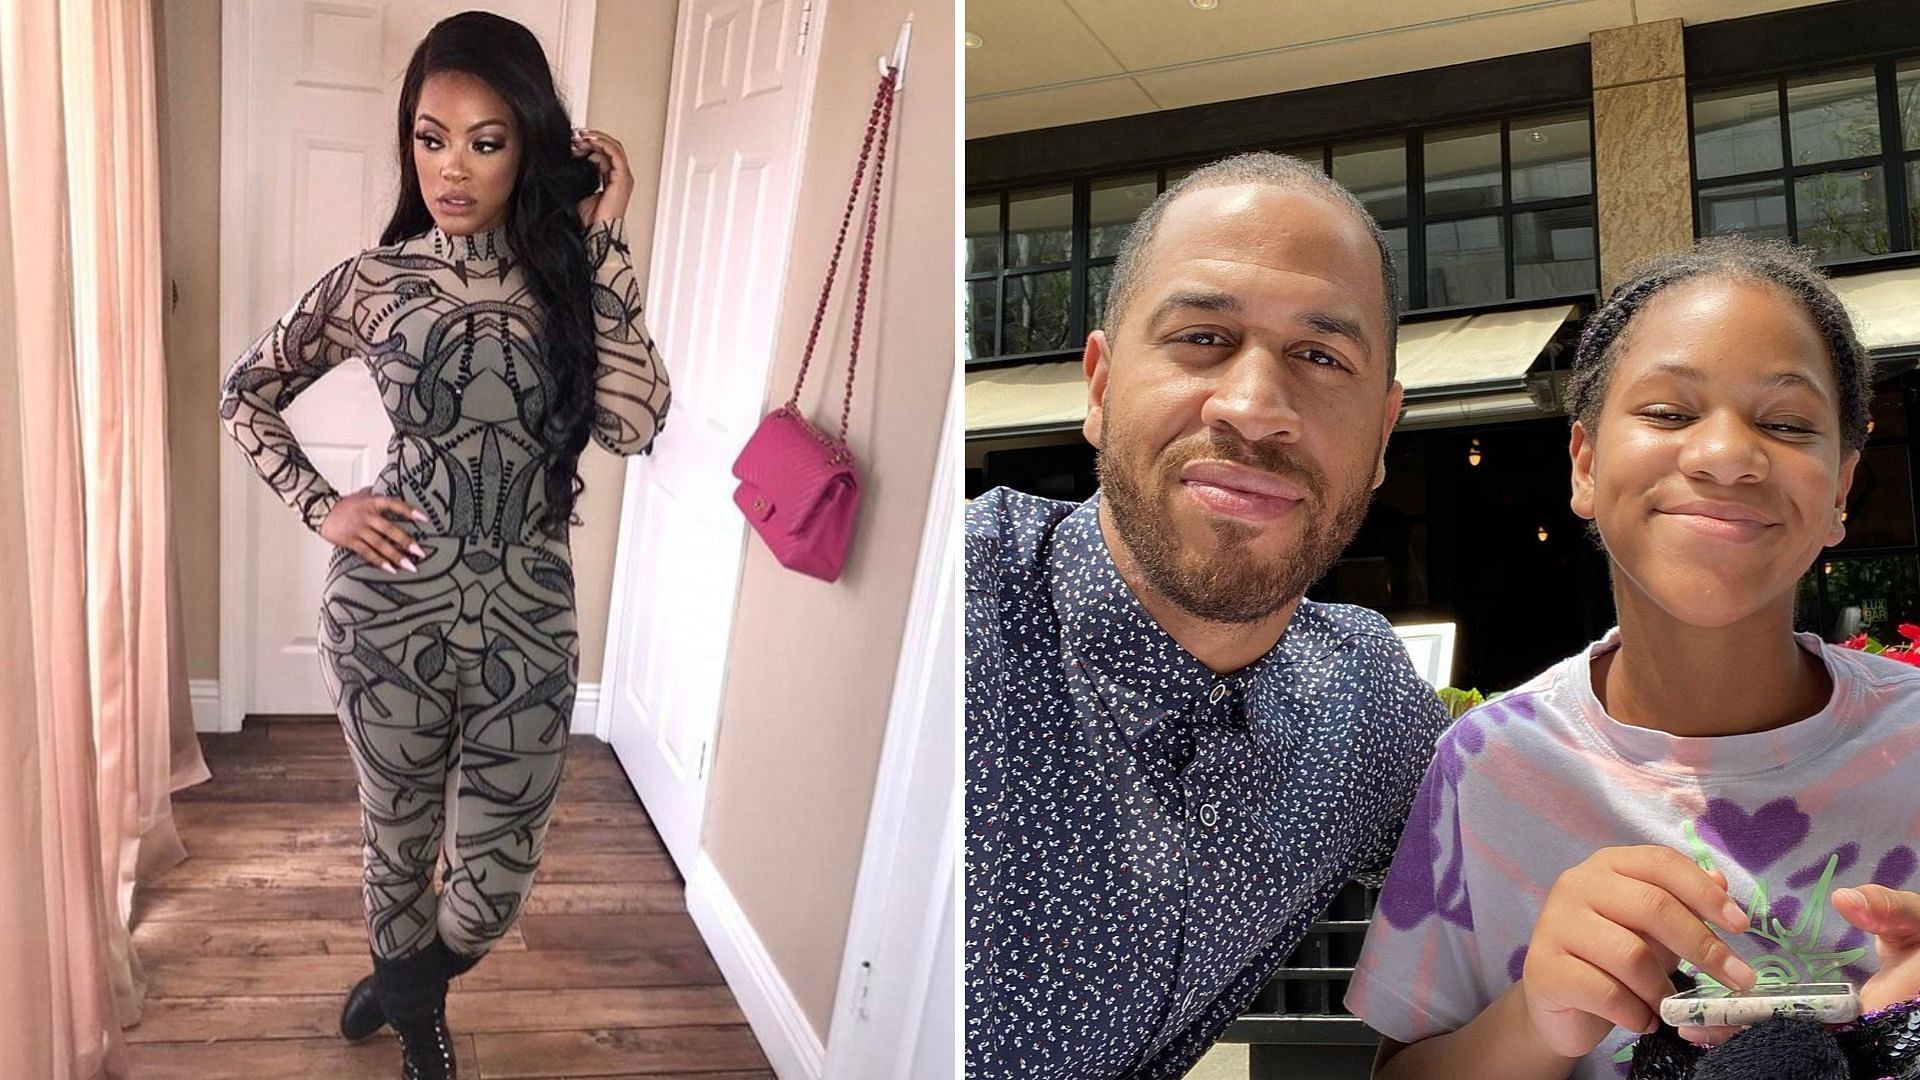 Basketball Wives star Malaysia Pargo suggested taking her ex-husband to court (Image via malaysiapargo1,jpargo5/Instagram)